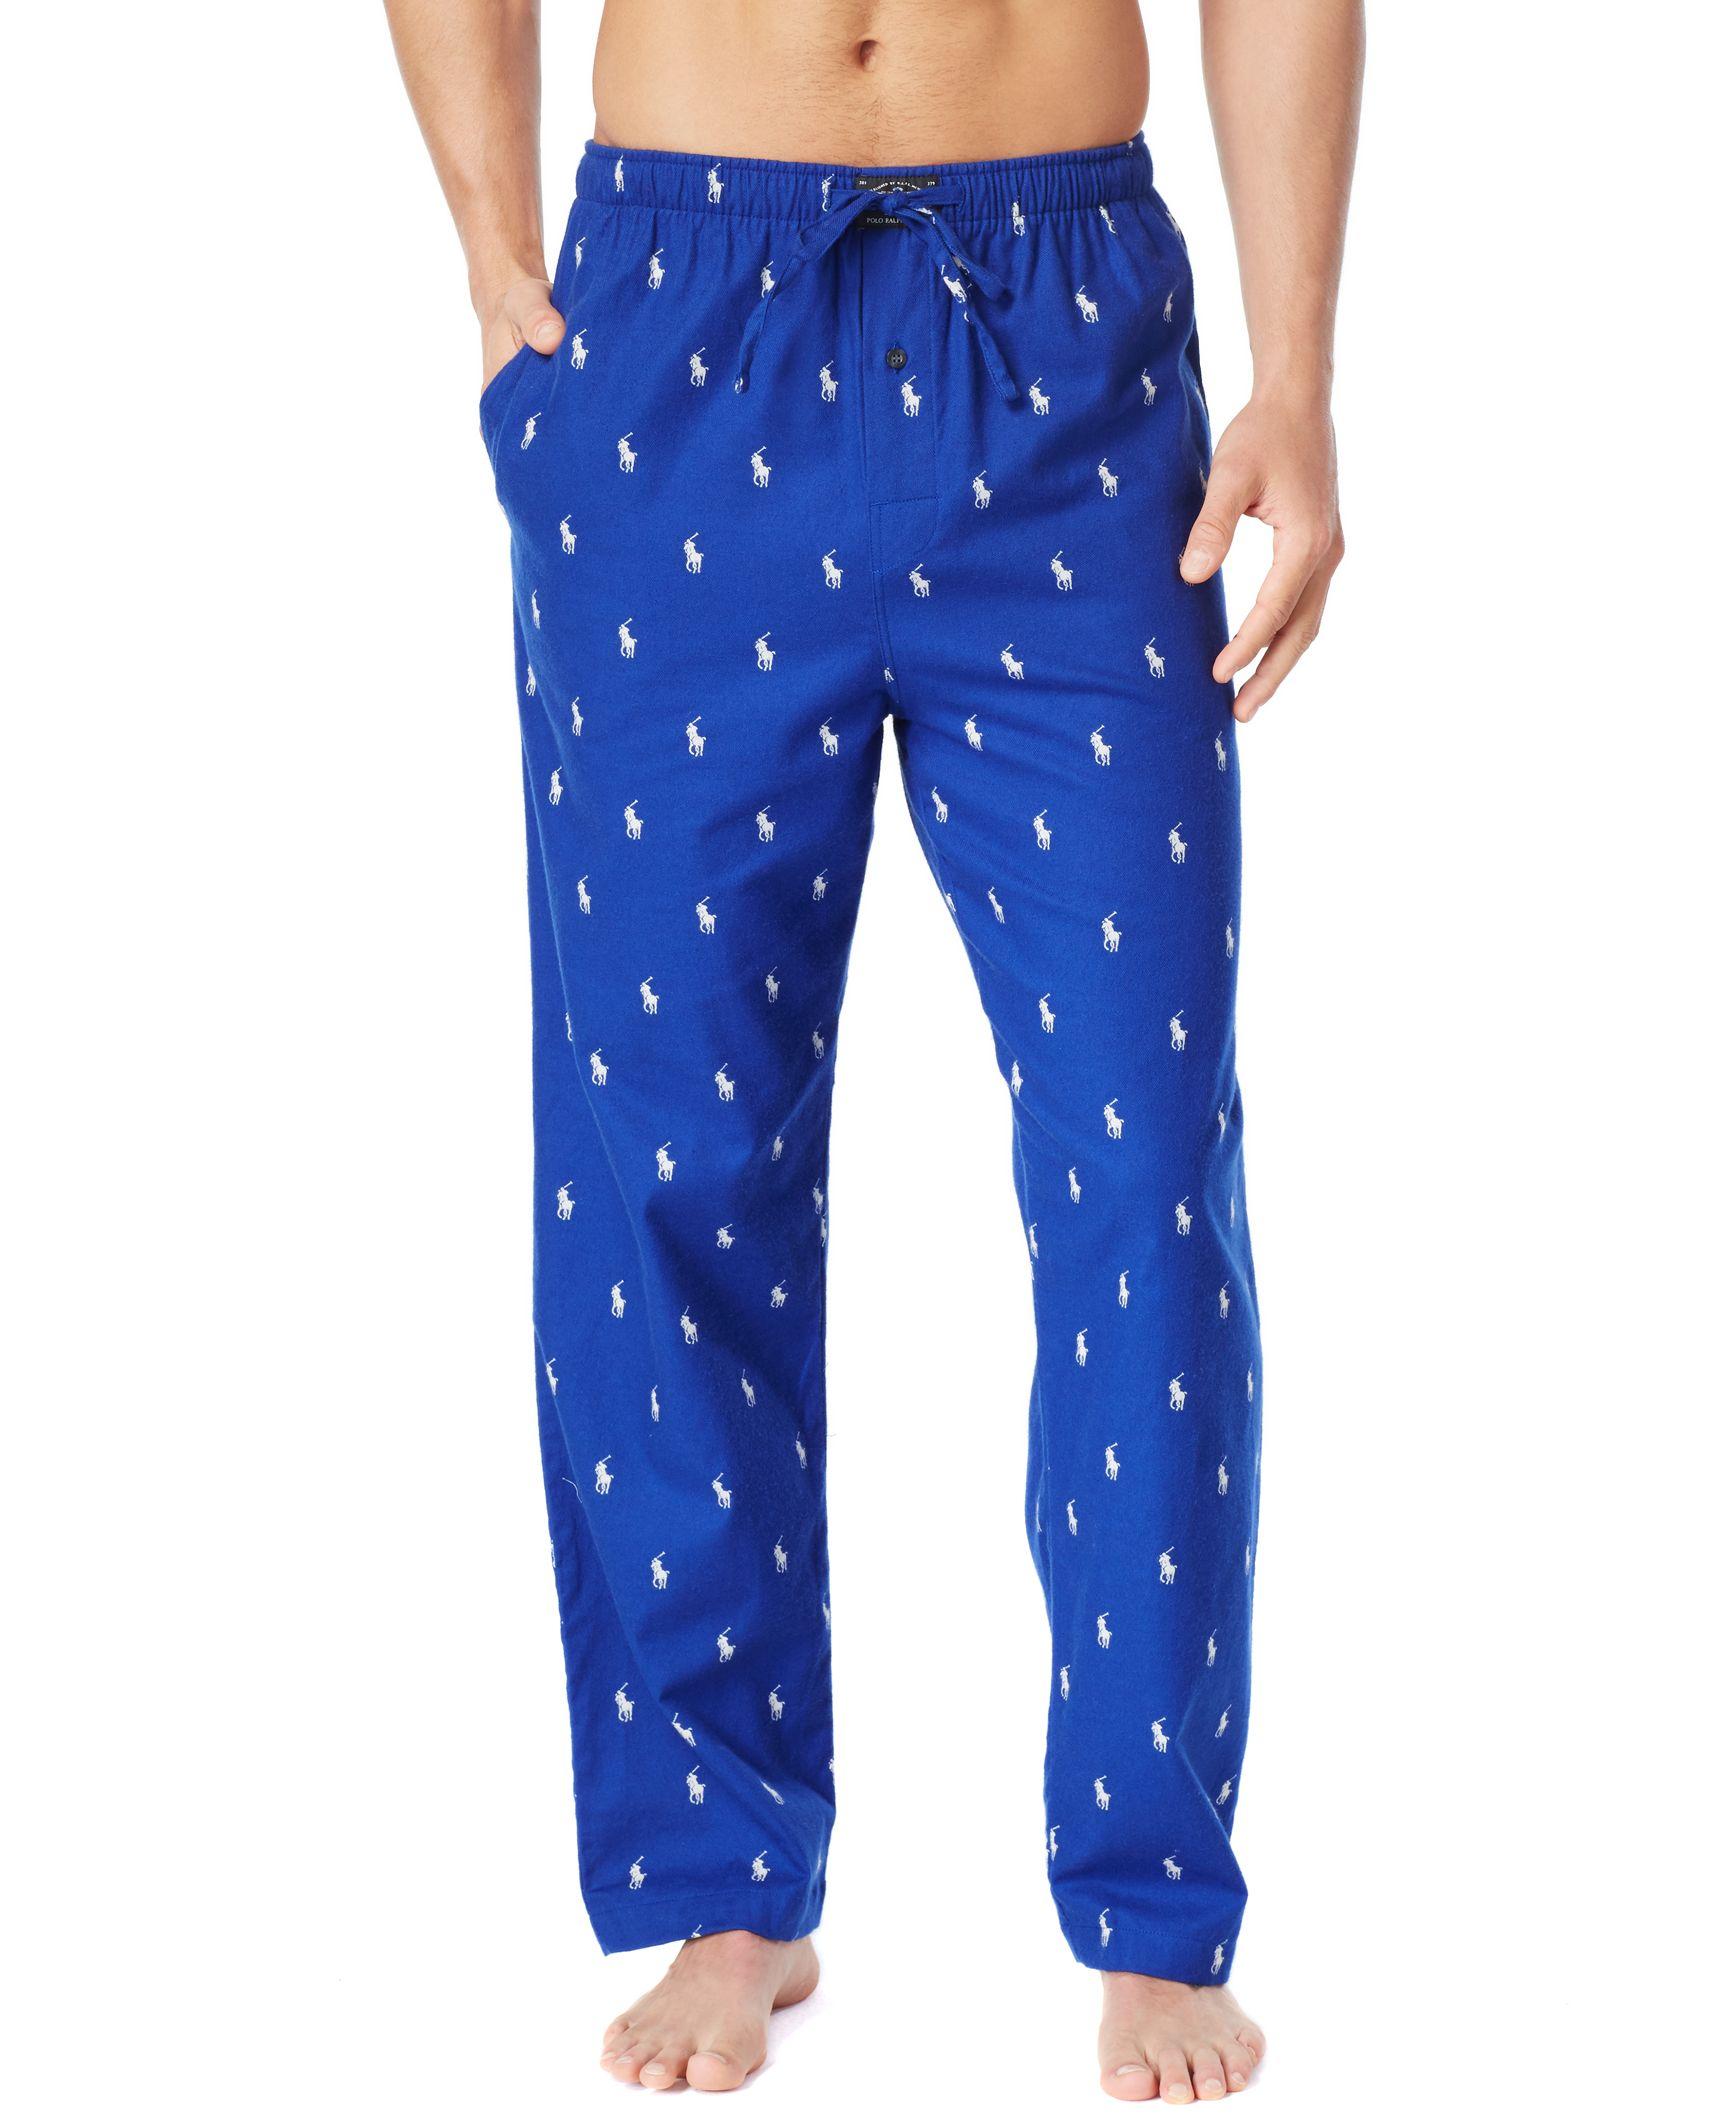 Polo Ralph Lauren Drawstring Pony-print Flannel Pajama Pants in Blue for Men - Lyst